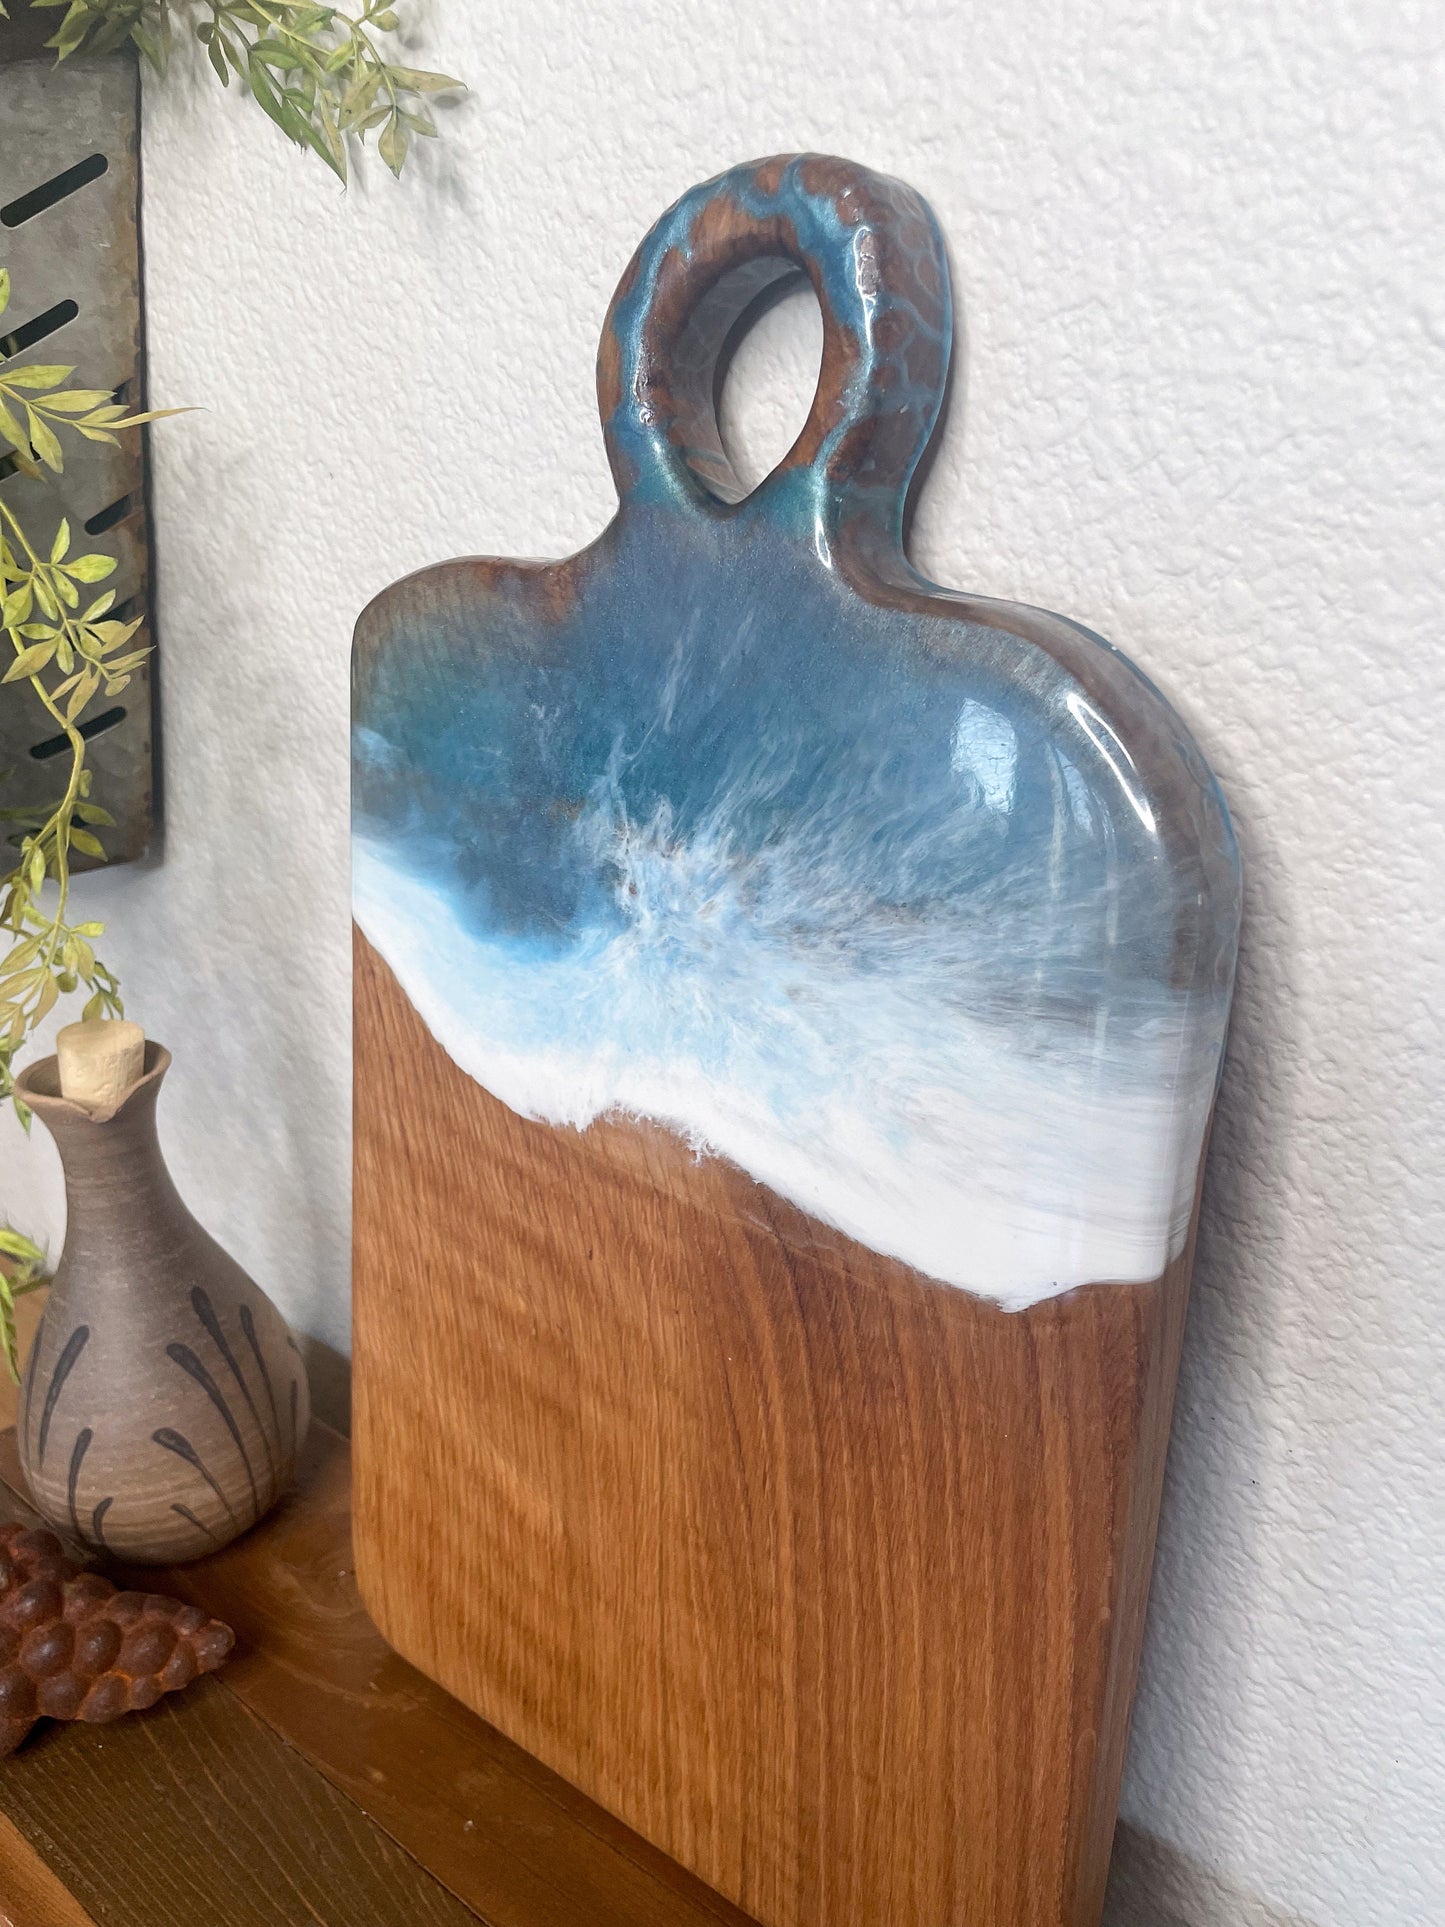 Wood and epoxy "wave" tray.  Ocean wave epoxy on an oak wood tray.